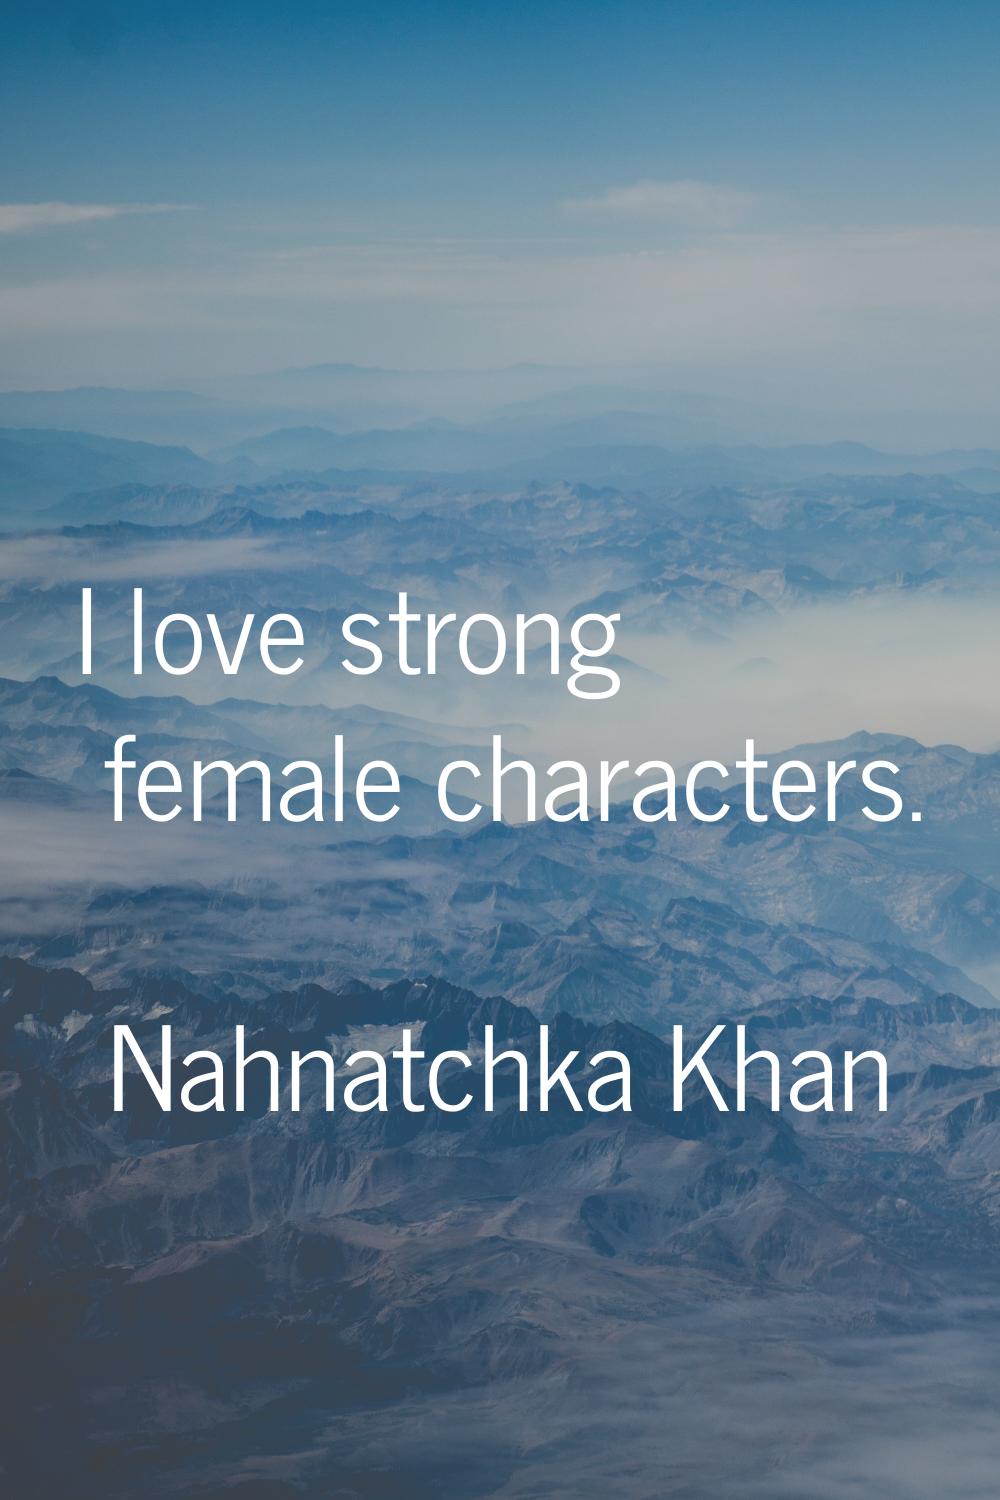 I love strong female characters.